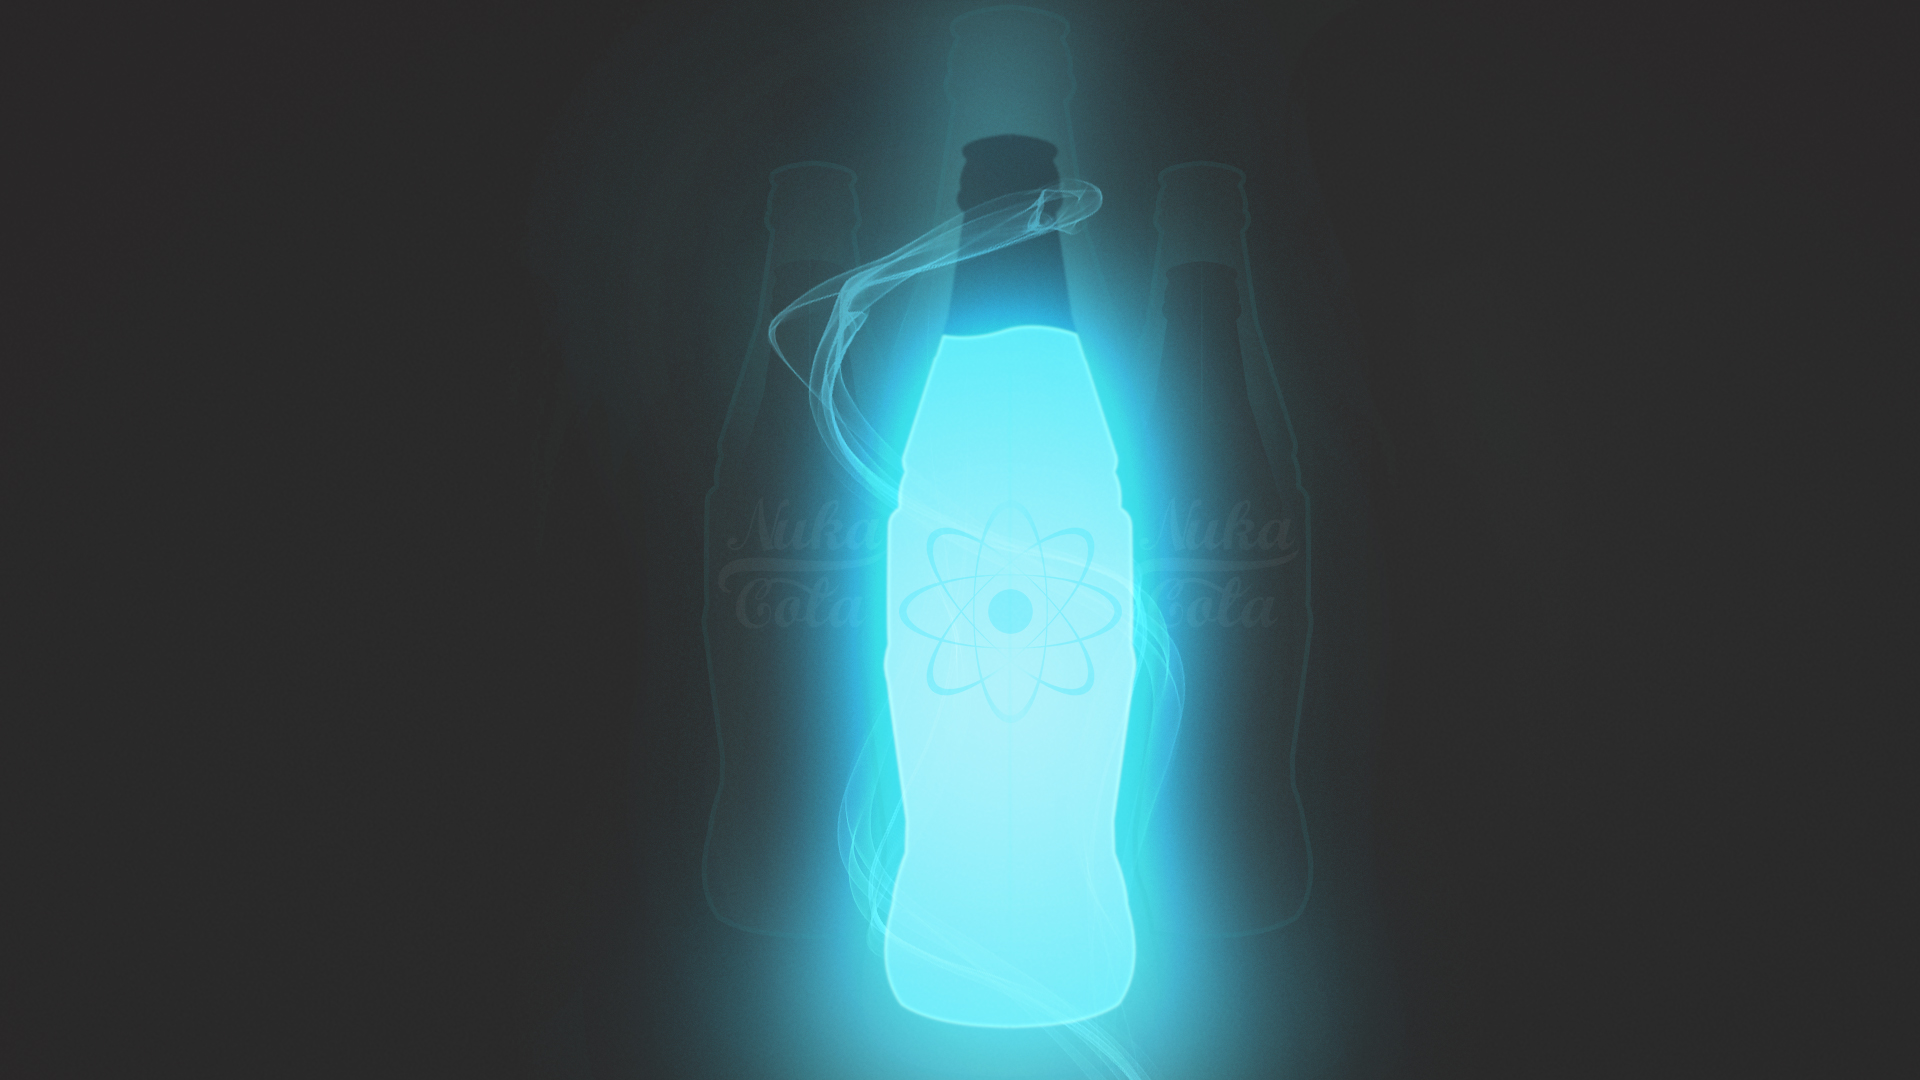 Nuka Cola Wallpaper Created By We Think Benjamin Stratton